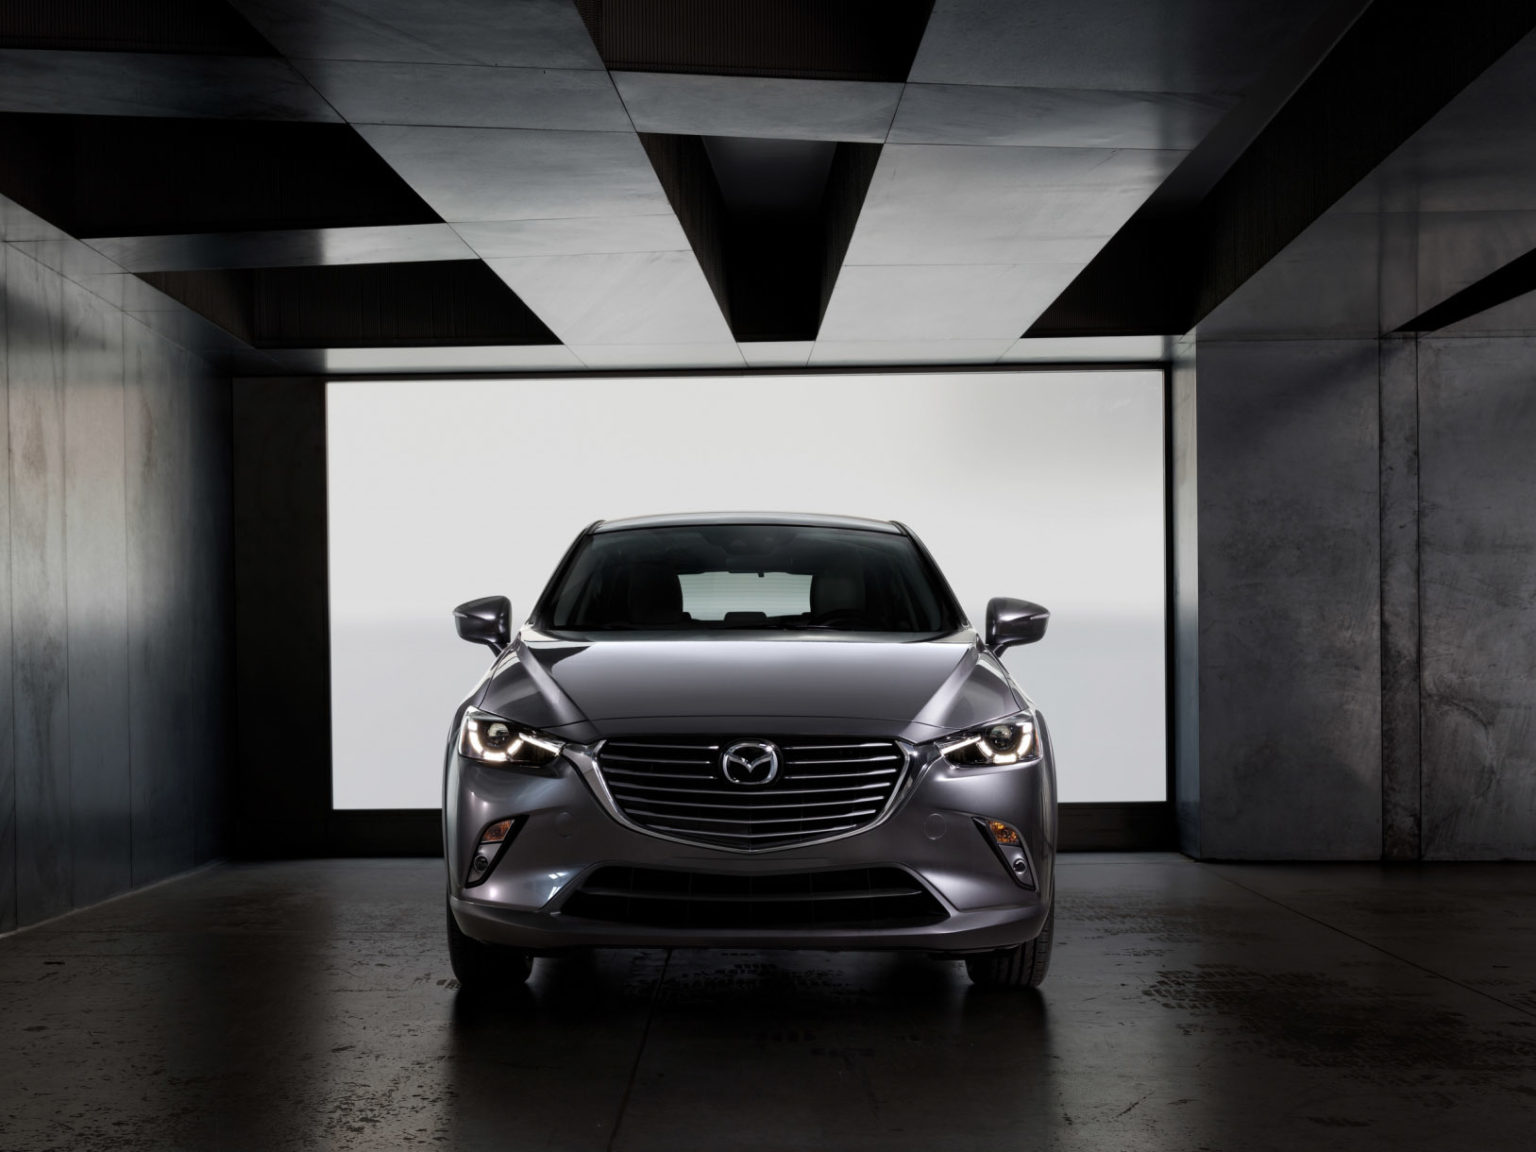 The Mazda CX-3 faces fresh competition from its crossover counterpart, the CX-30.